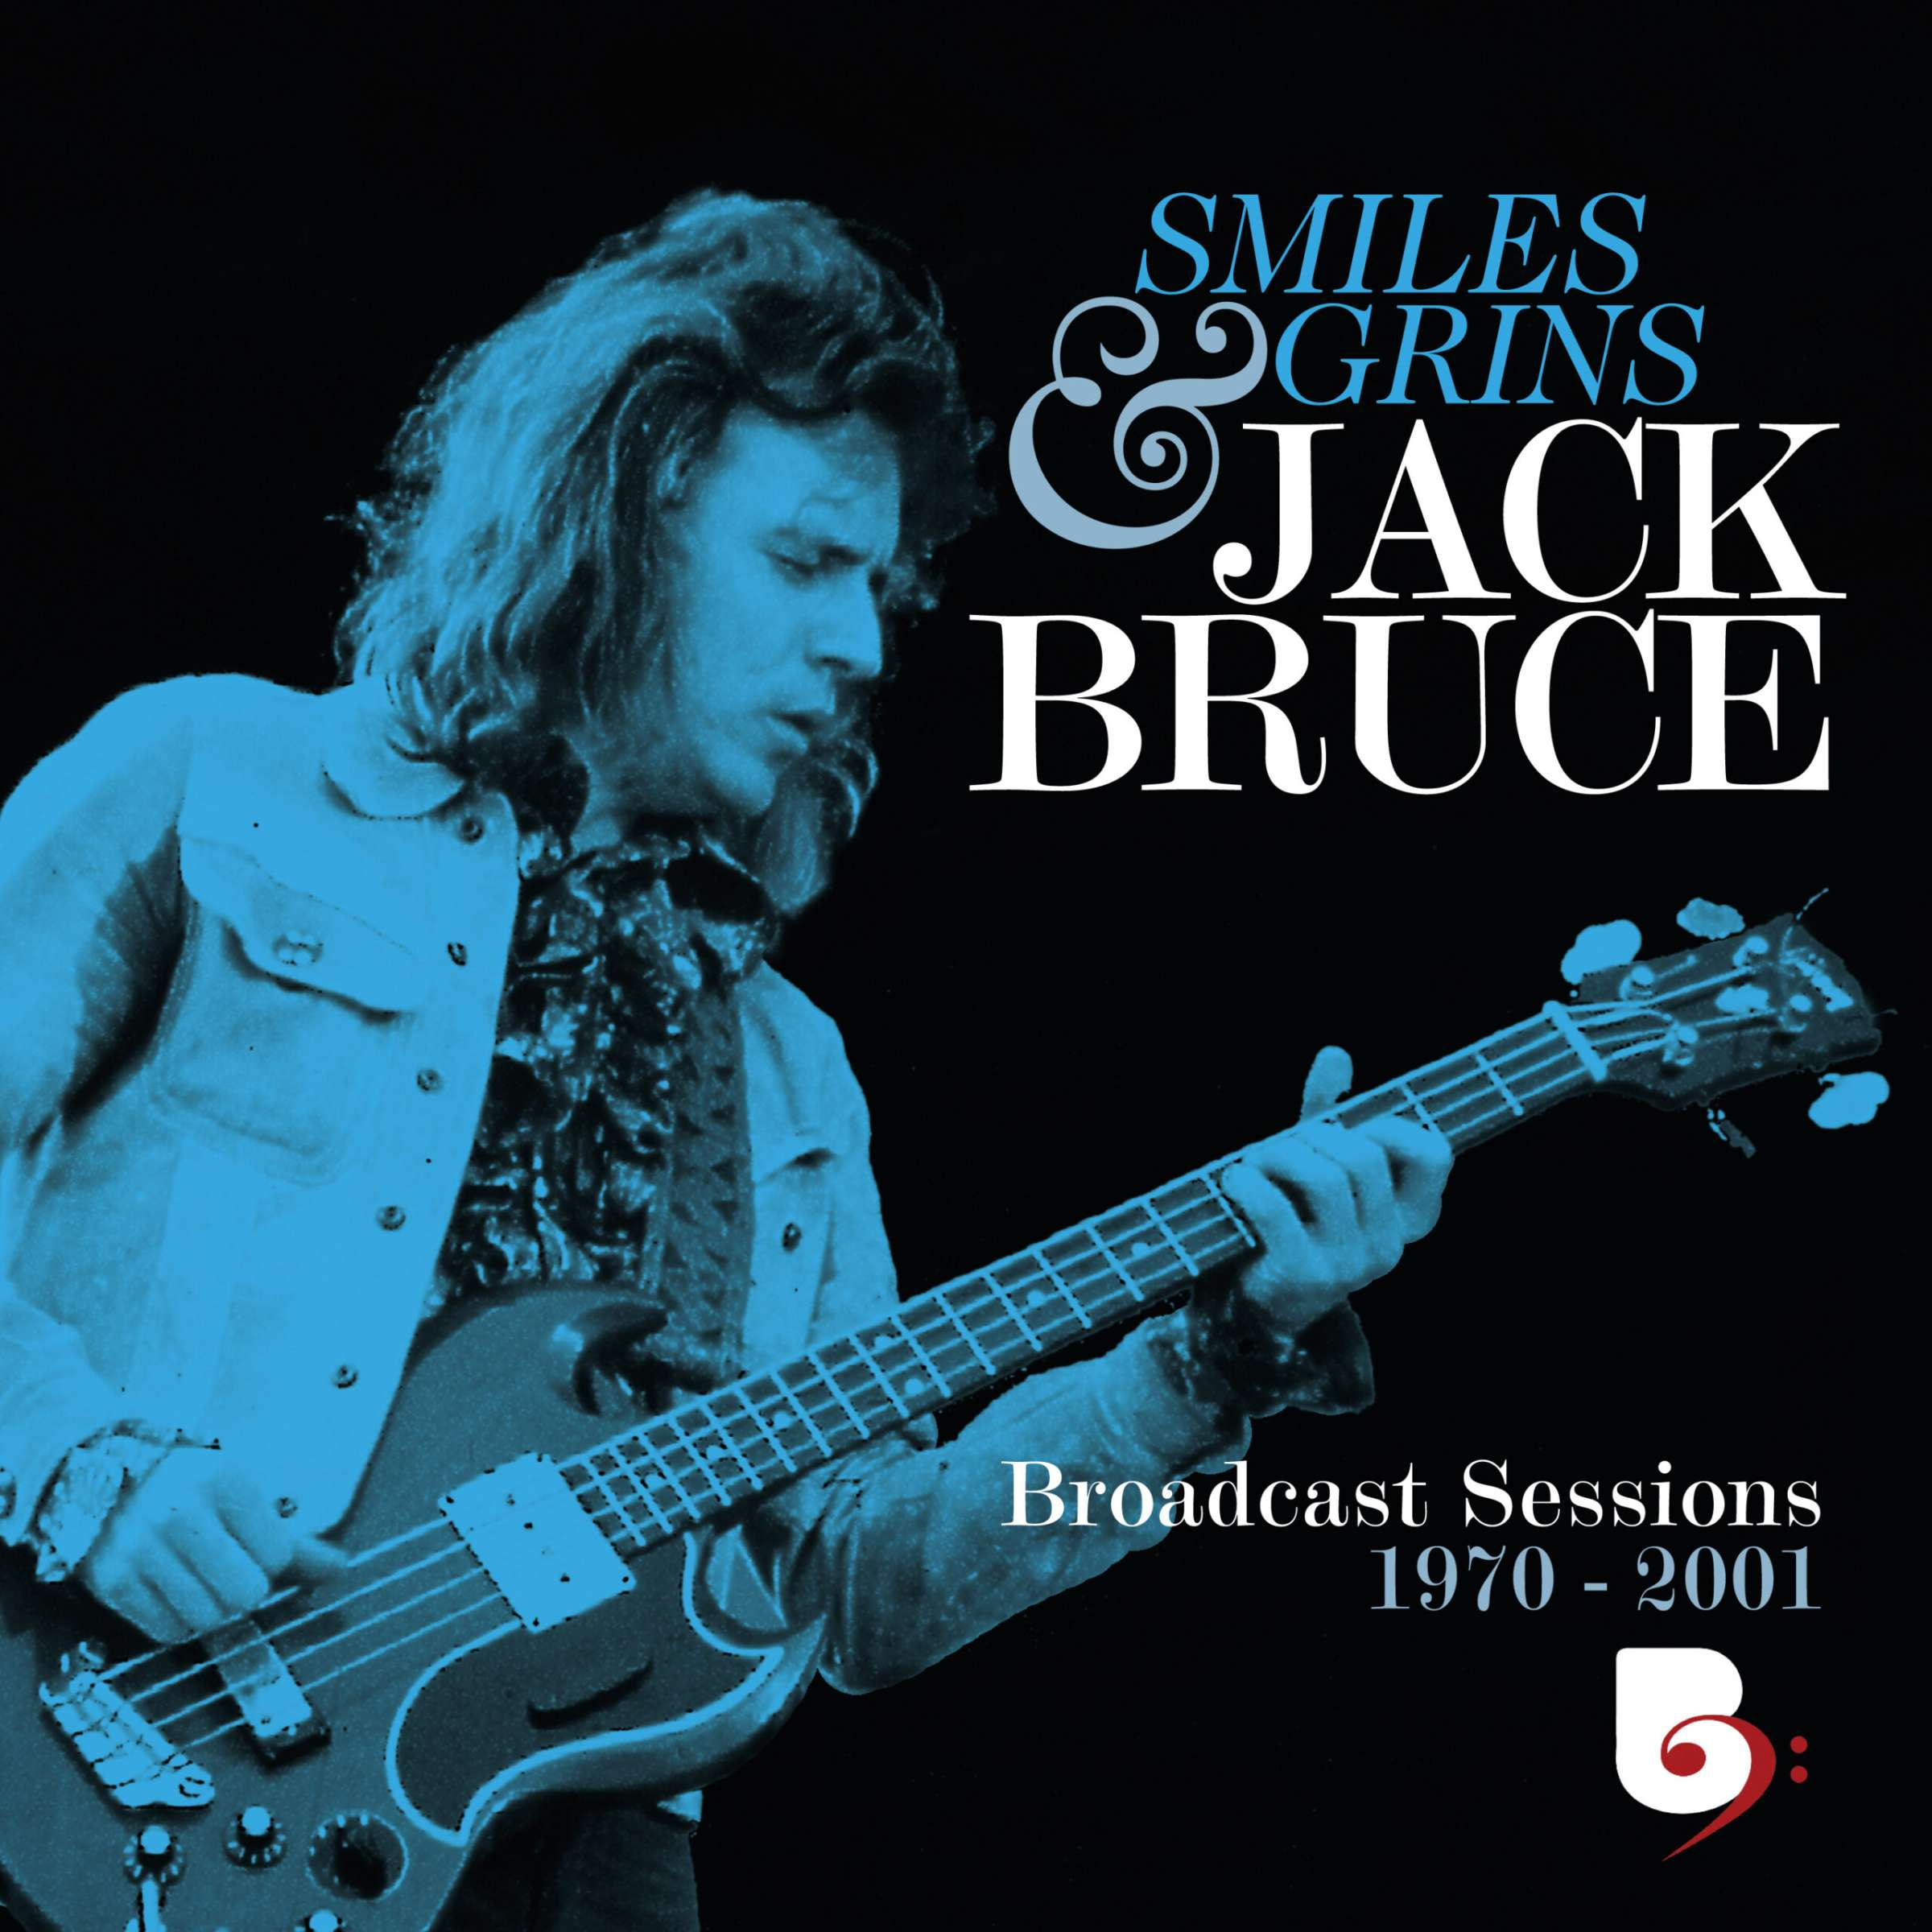 SMILES AND GRINS BROADCAST SESSIONS - 4CD+2BLURAY LTD. ED.